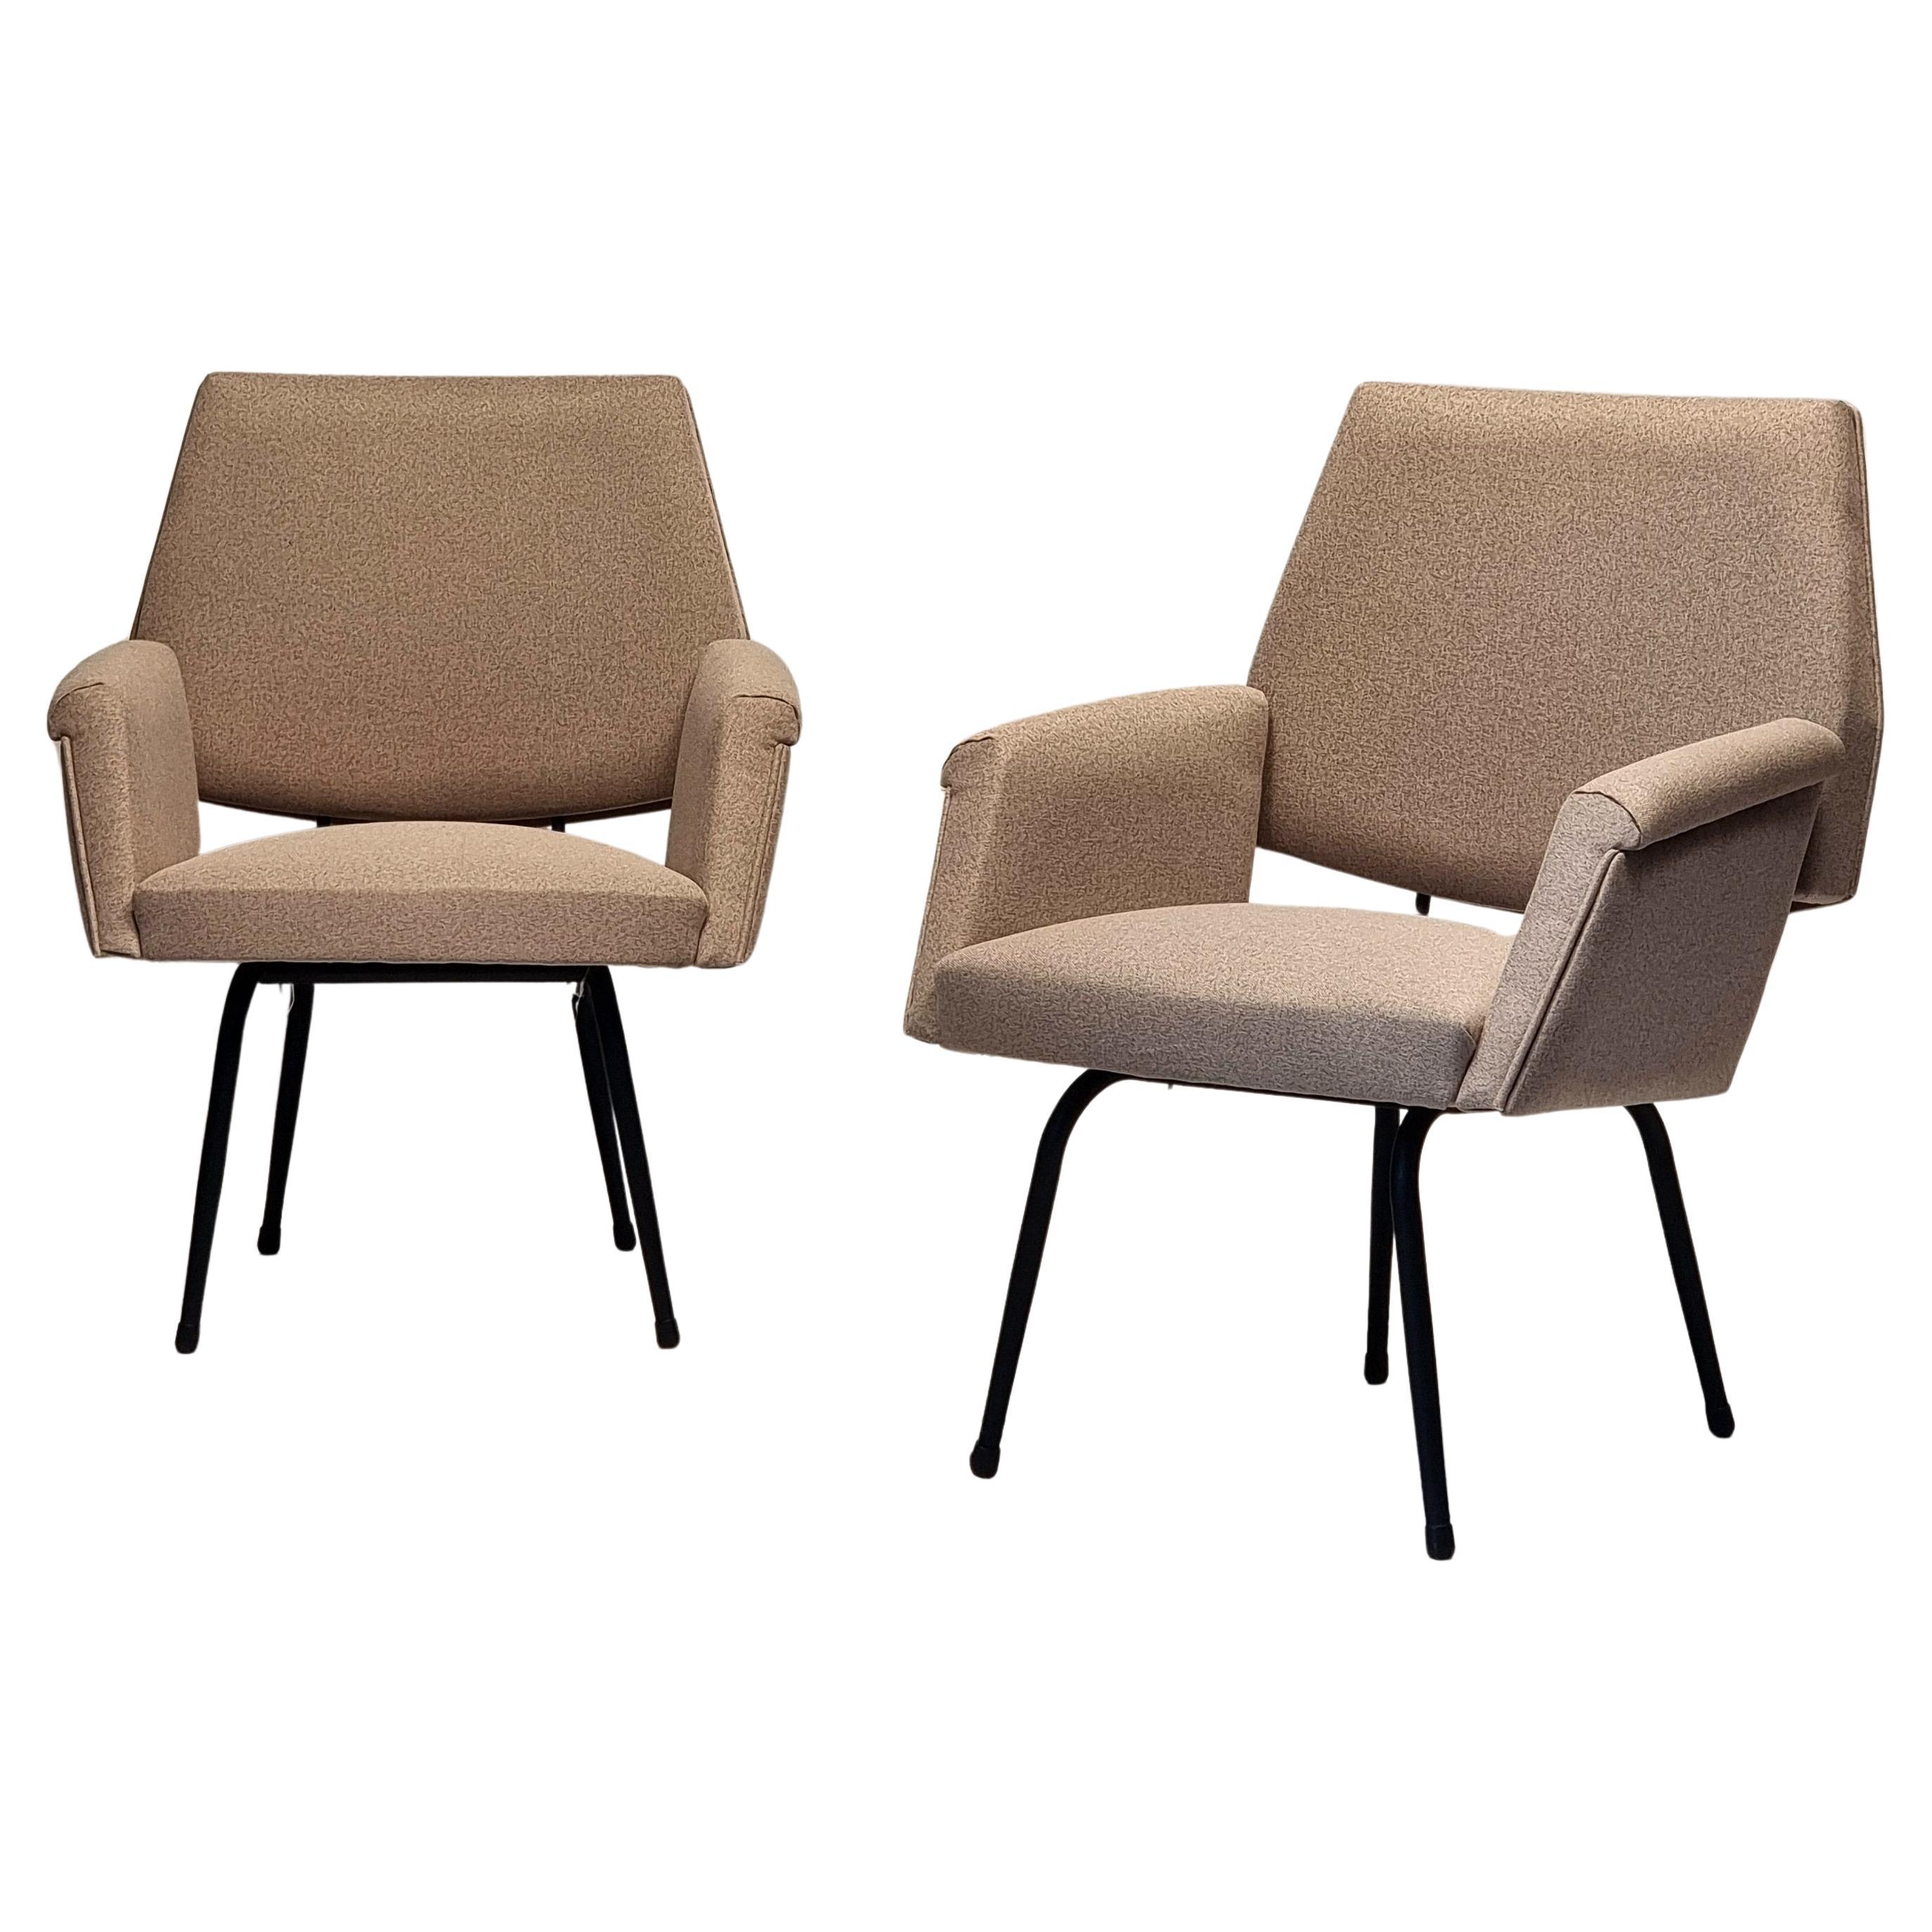 Pair Of French Armchairs - Modernist - Ca 1950